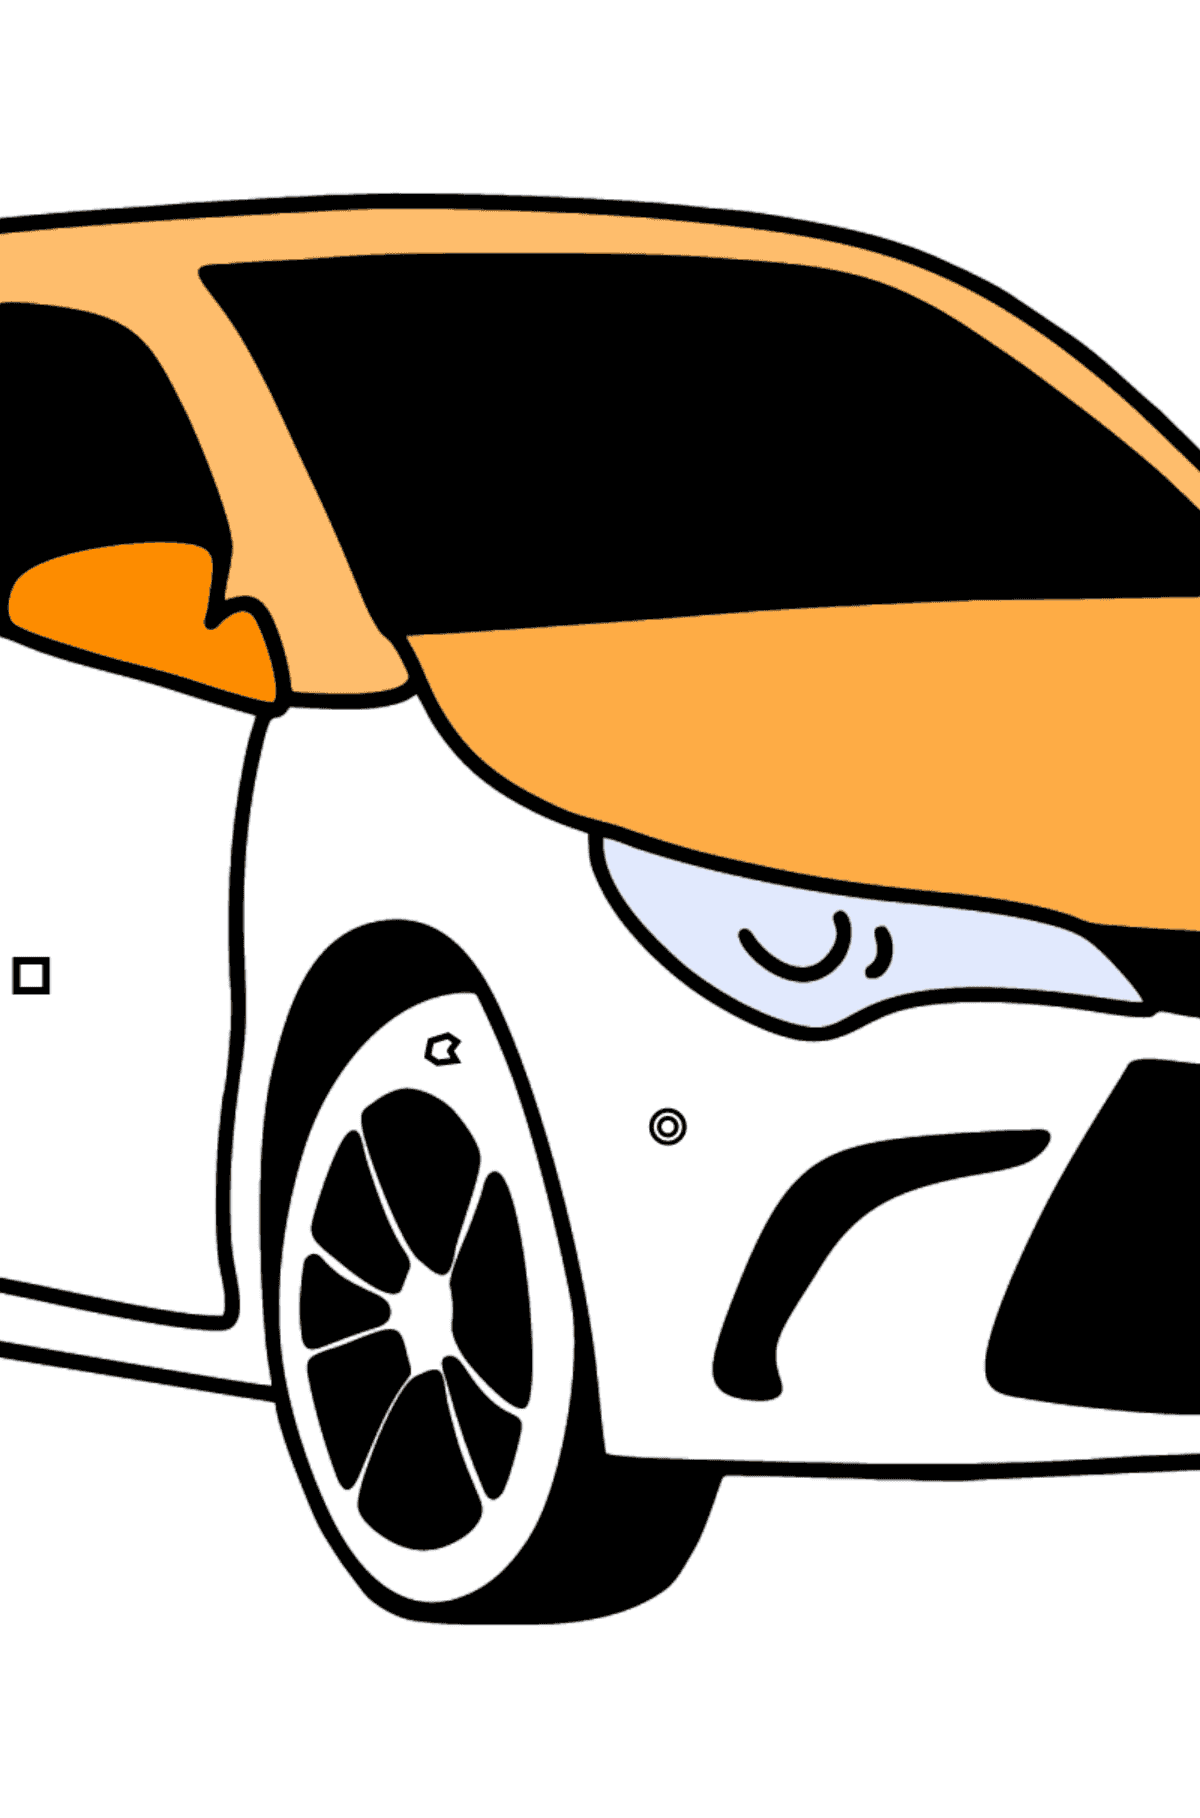 Toyota Camry coloring page - Coloring by Geometric Shapes for Kids